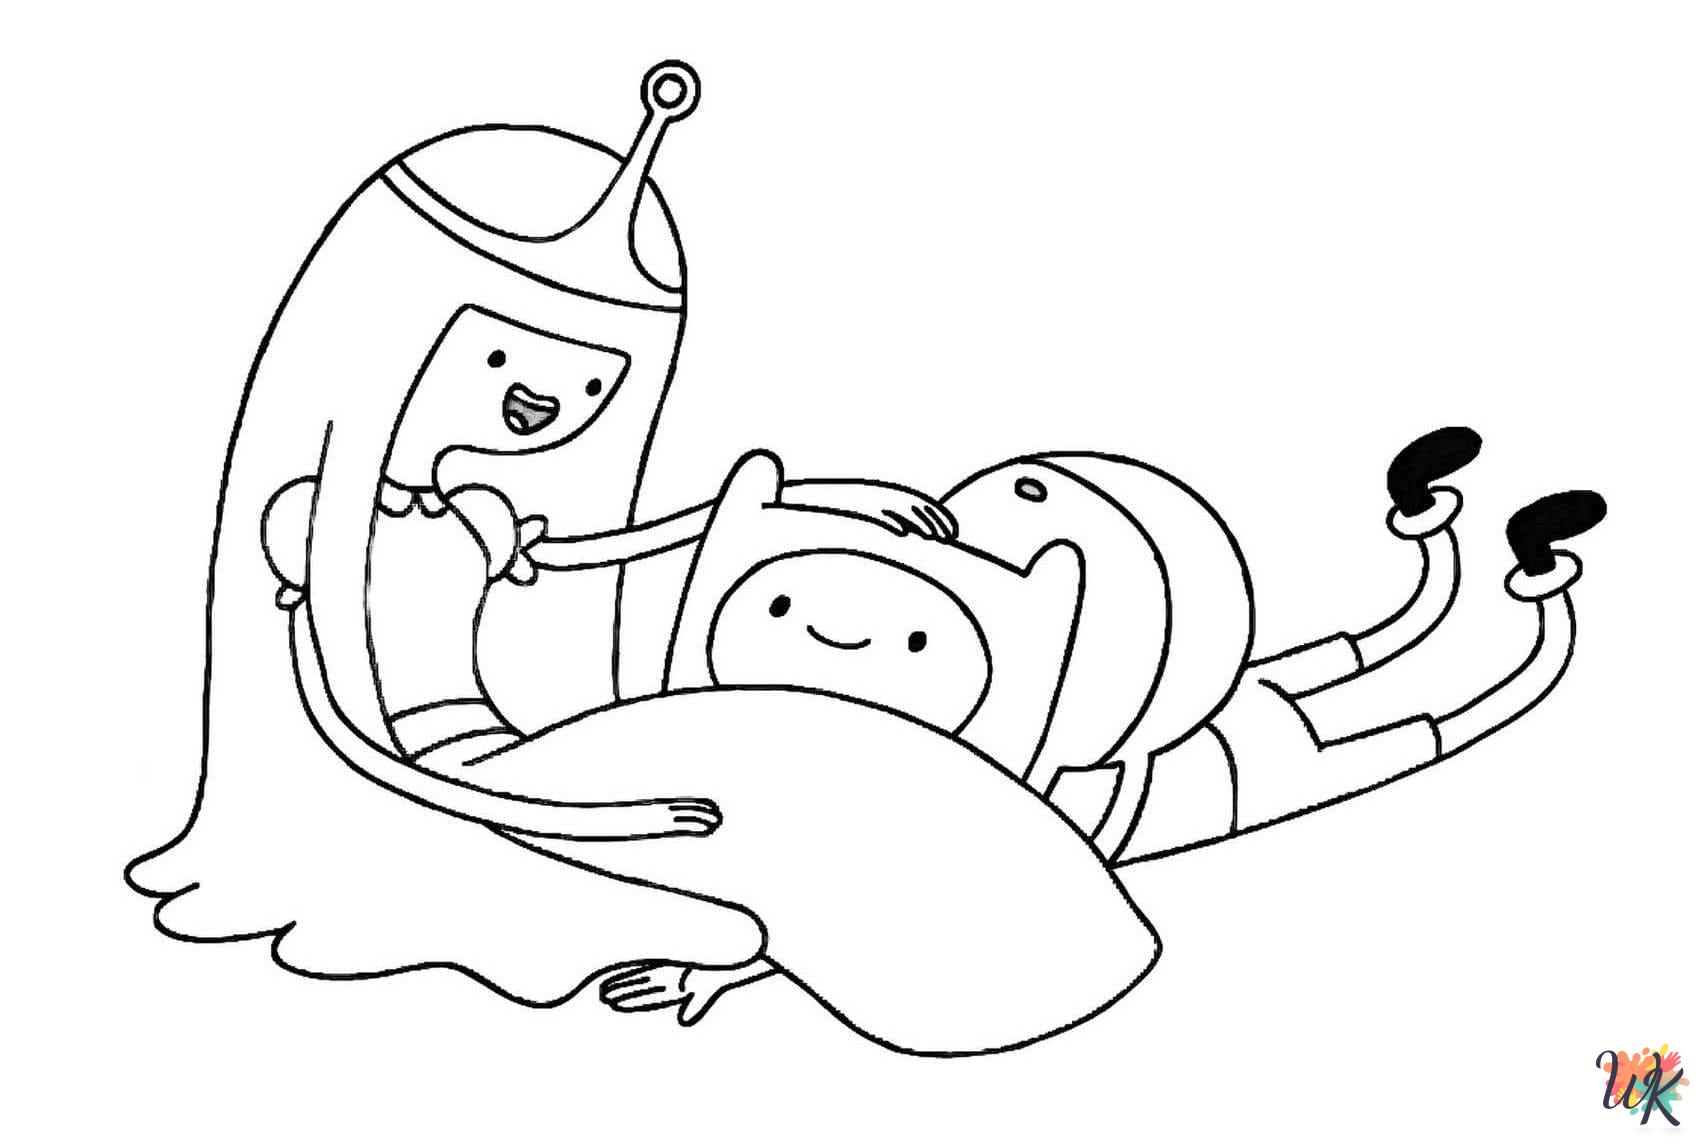 free full size printable Adventure Time coloring pages for adults pdf